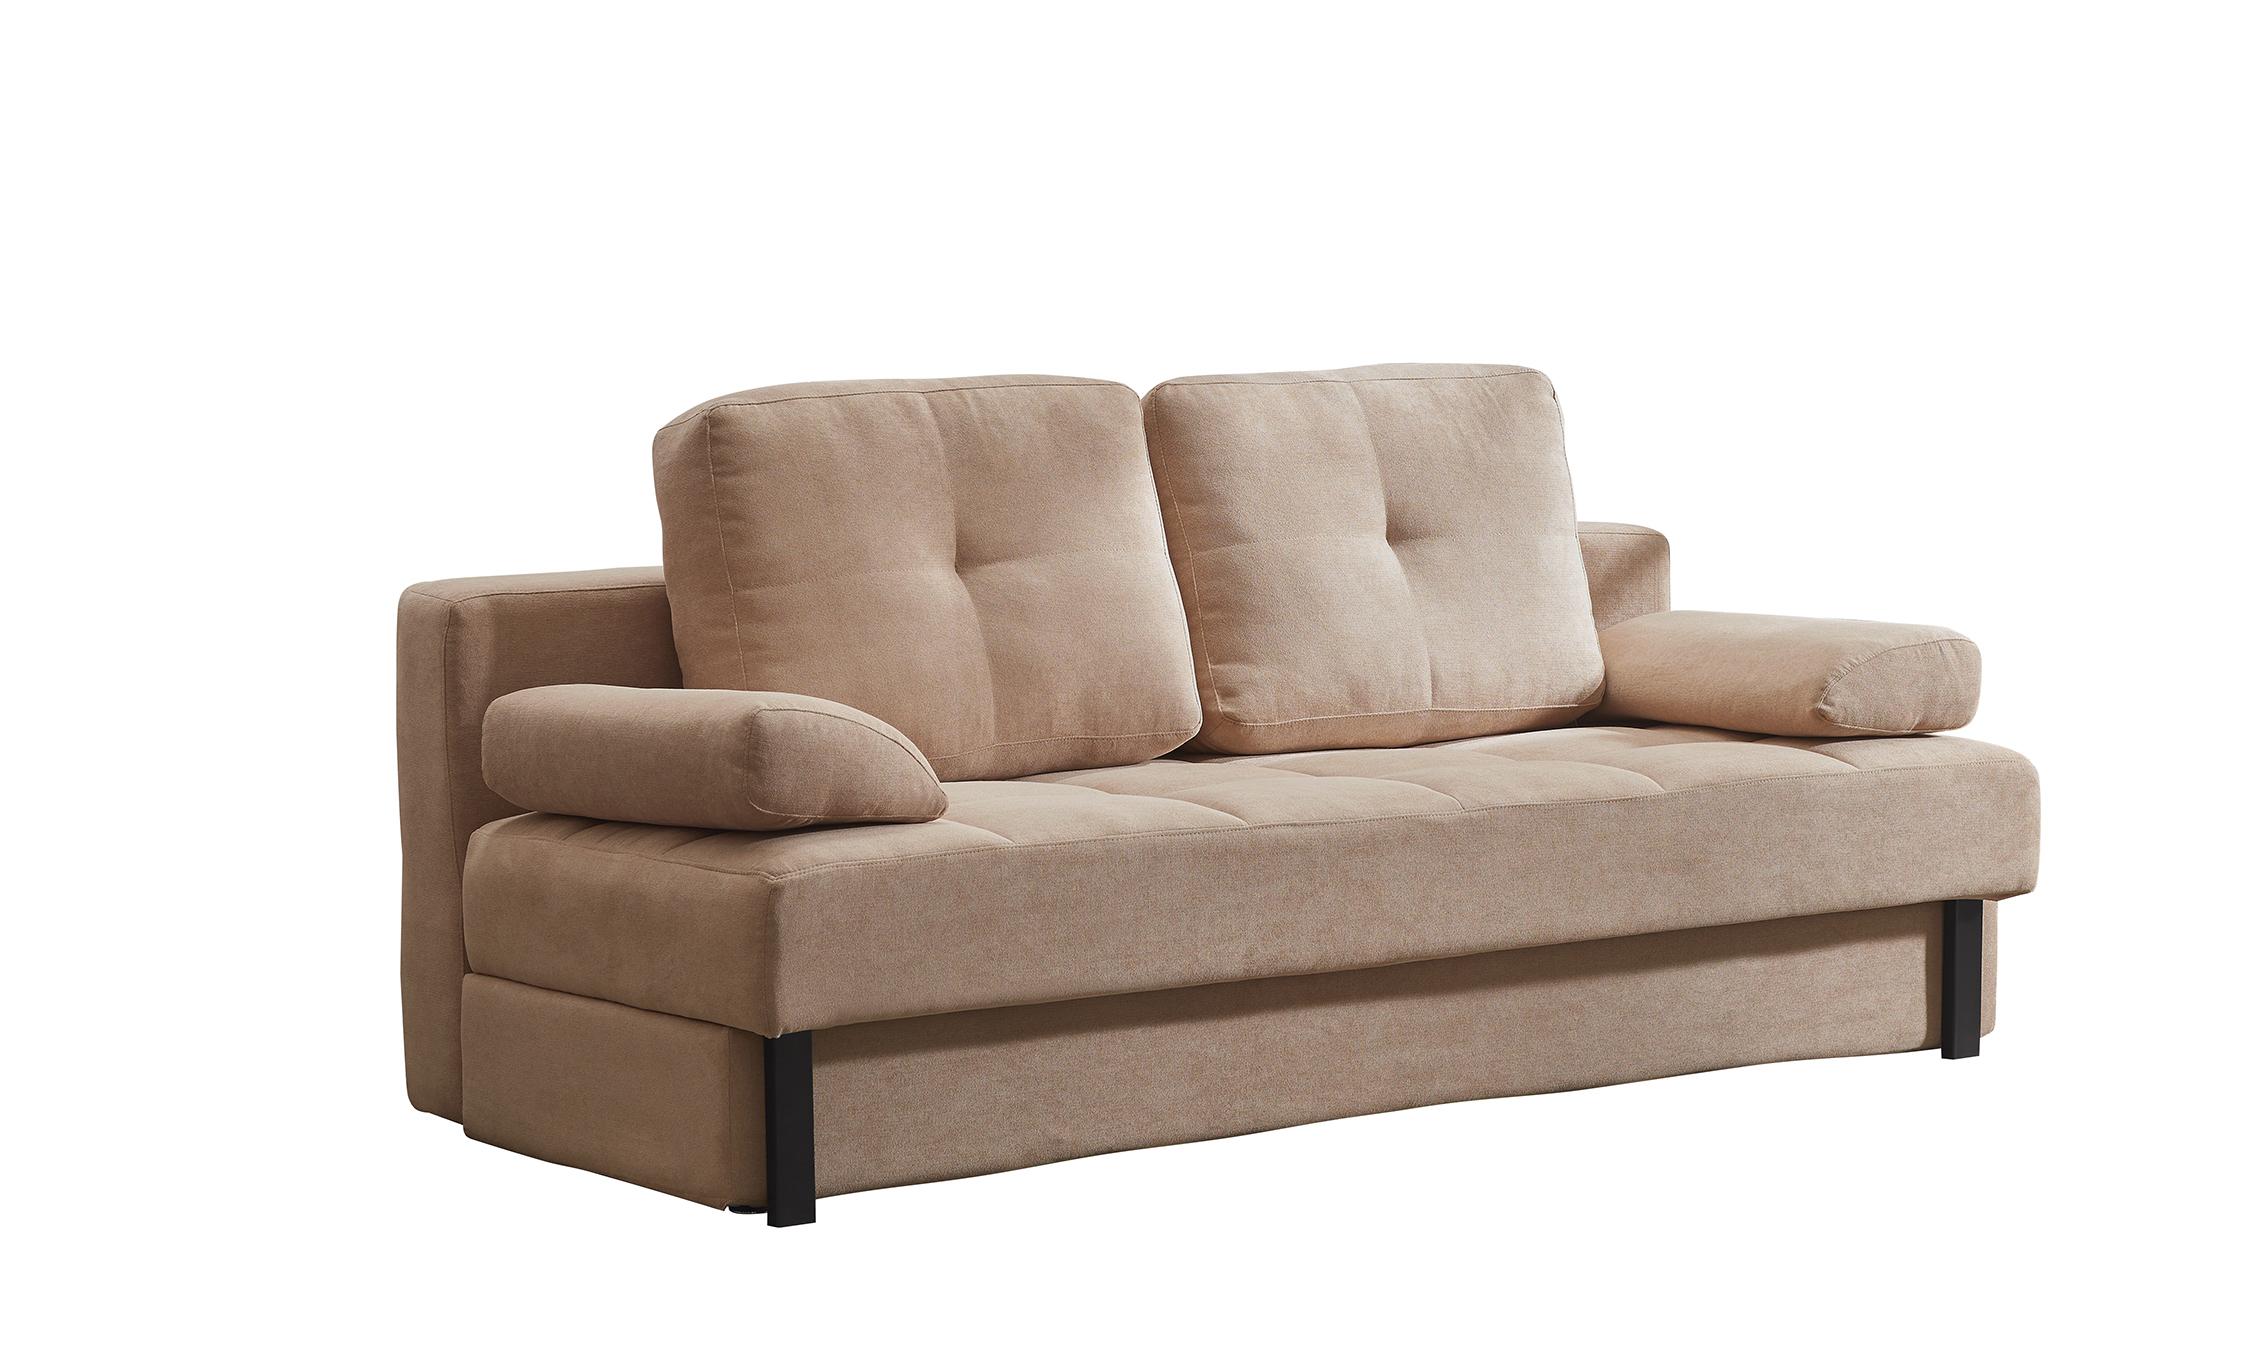 

    
ESF 98 Contemporary Beige Fabric 3 Seat Sofa-bed Modern Chic
